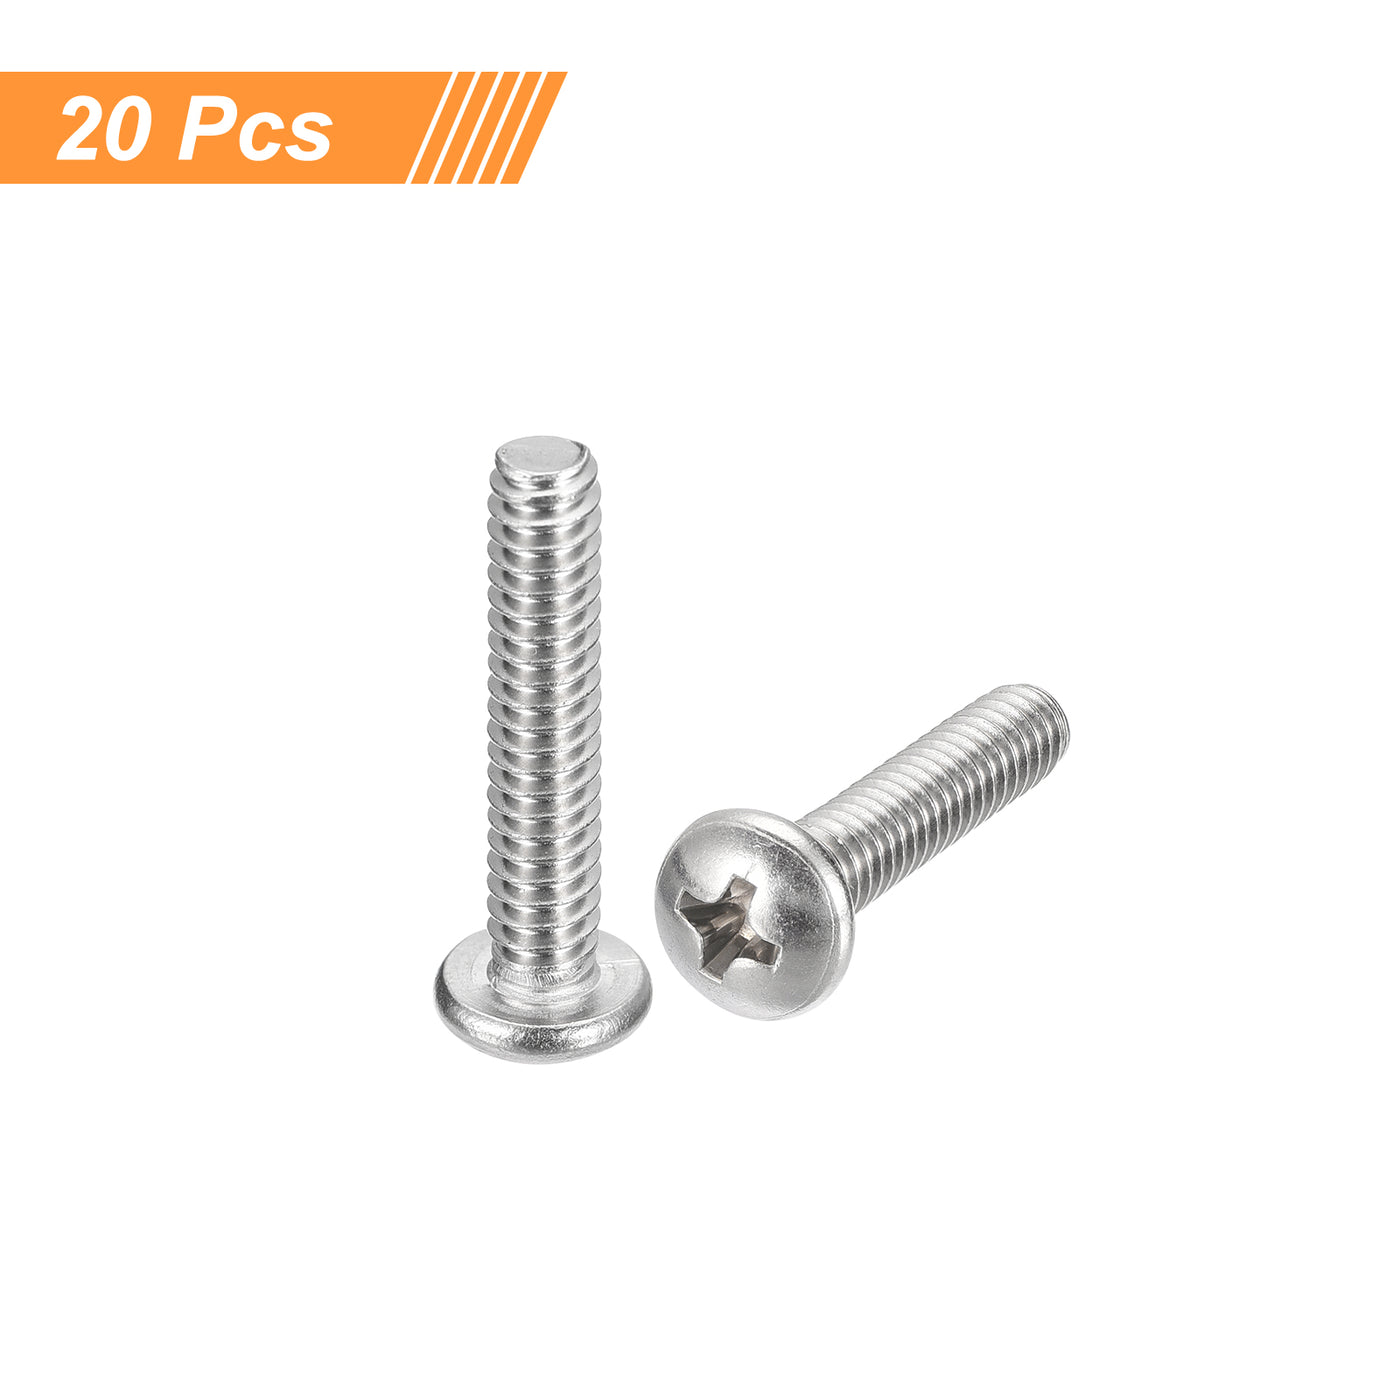 uxcell Uxcell #10-24x1" Pan Head Machine Screws, Stainless Steel 18-8 Screw, Pack of 20